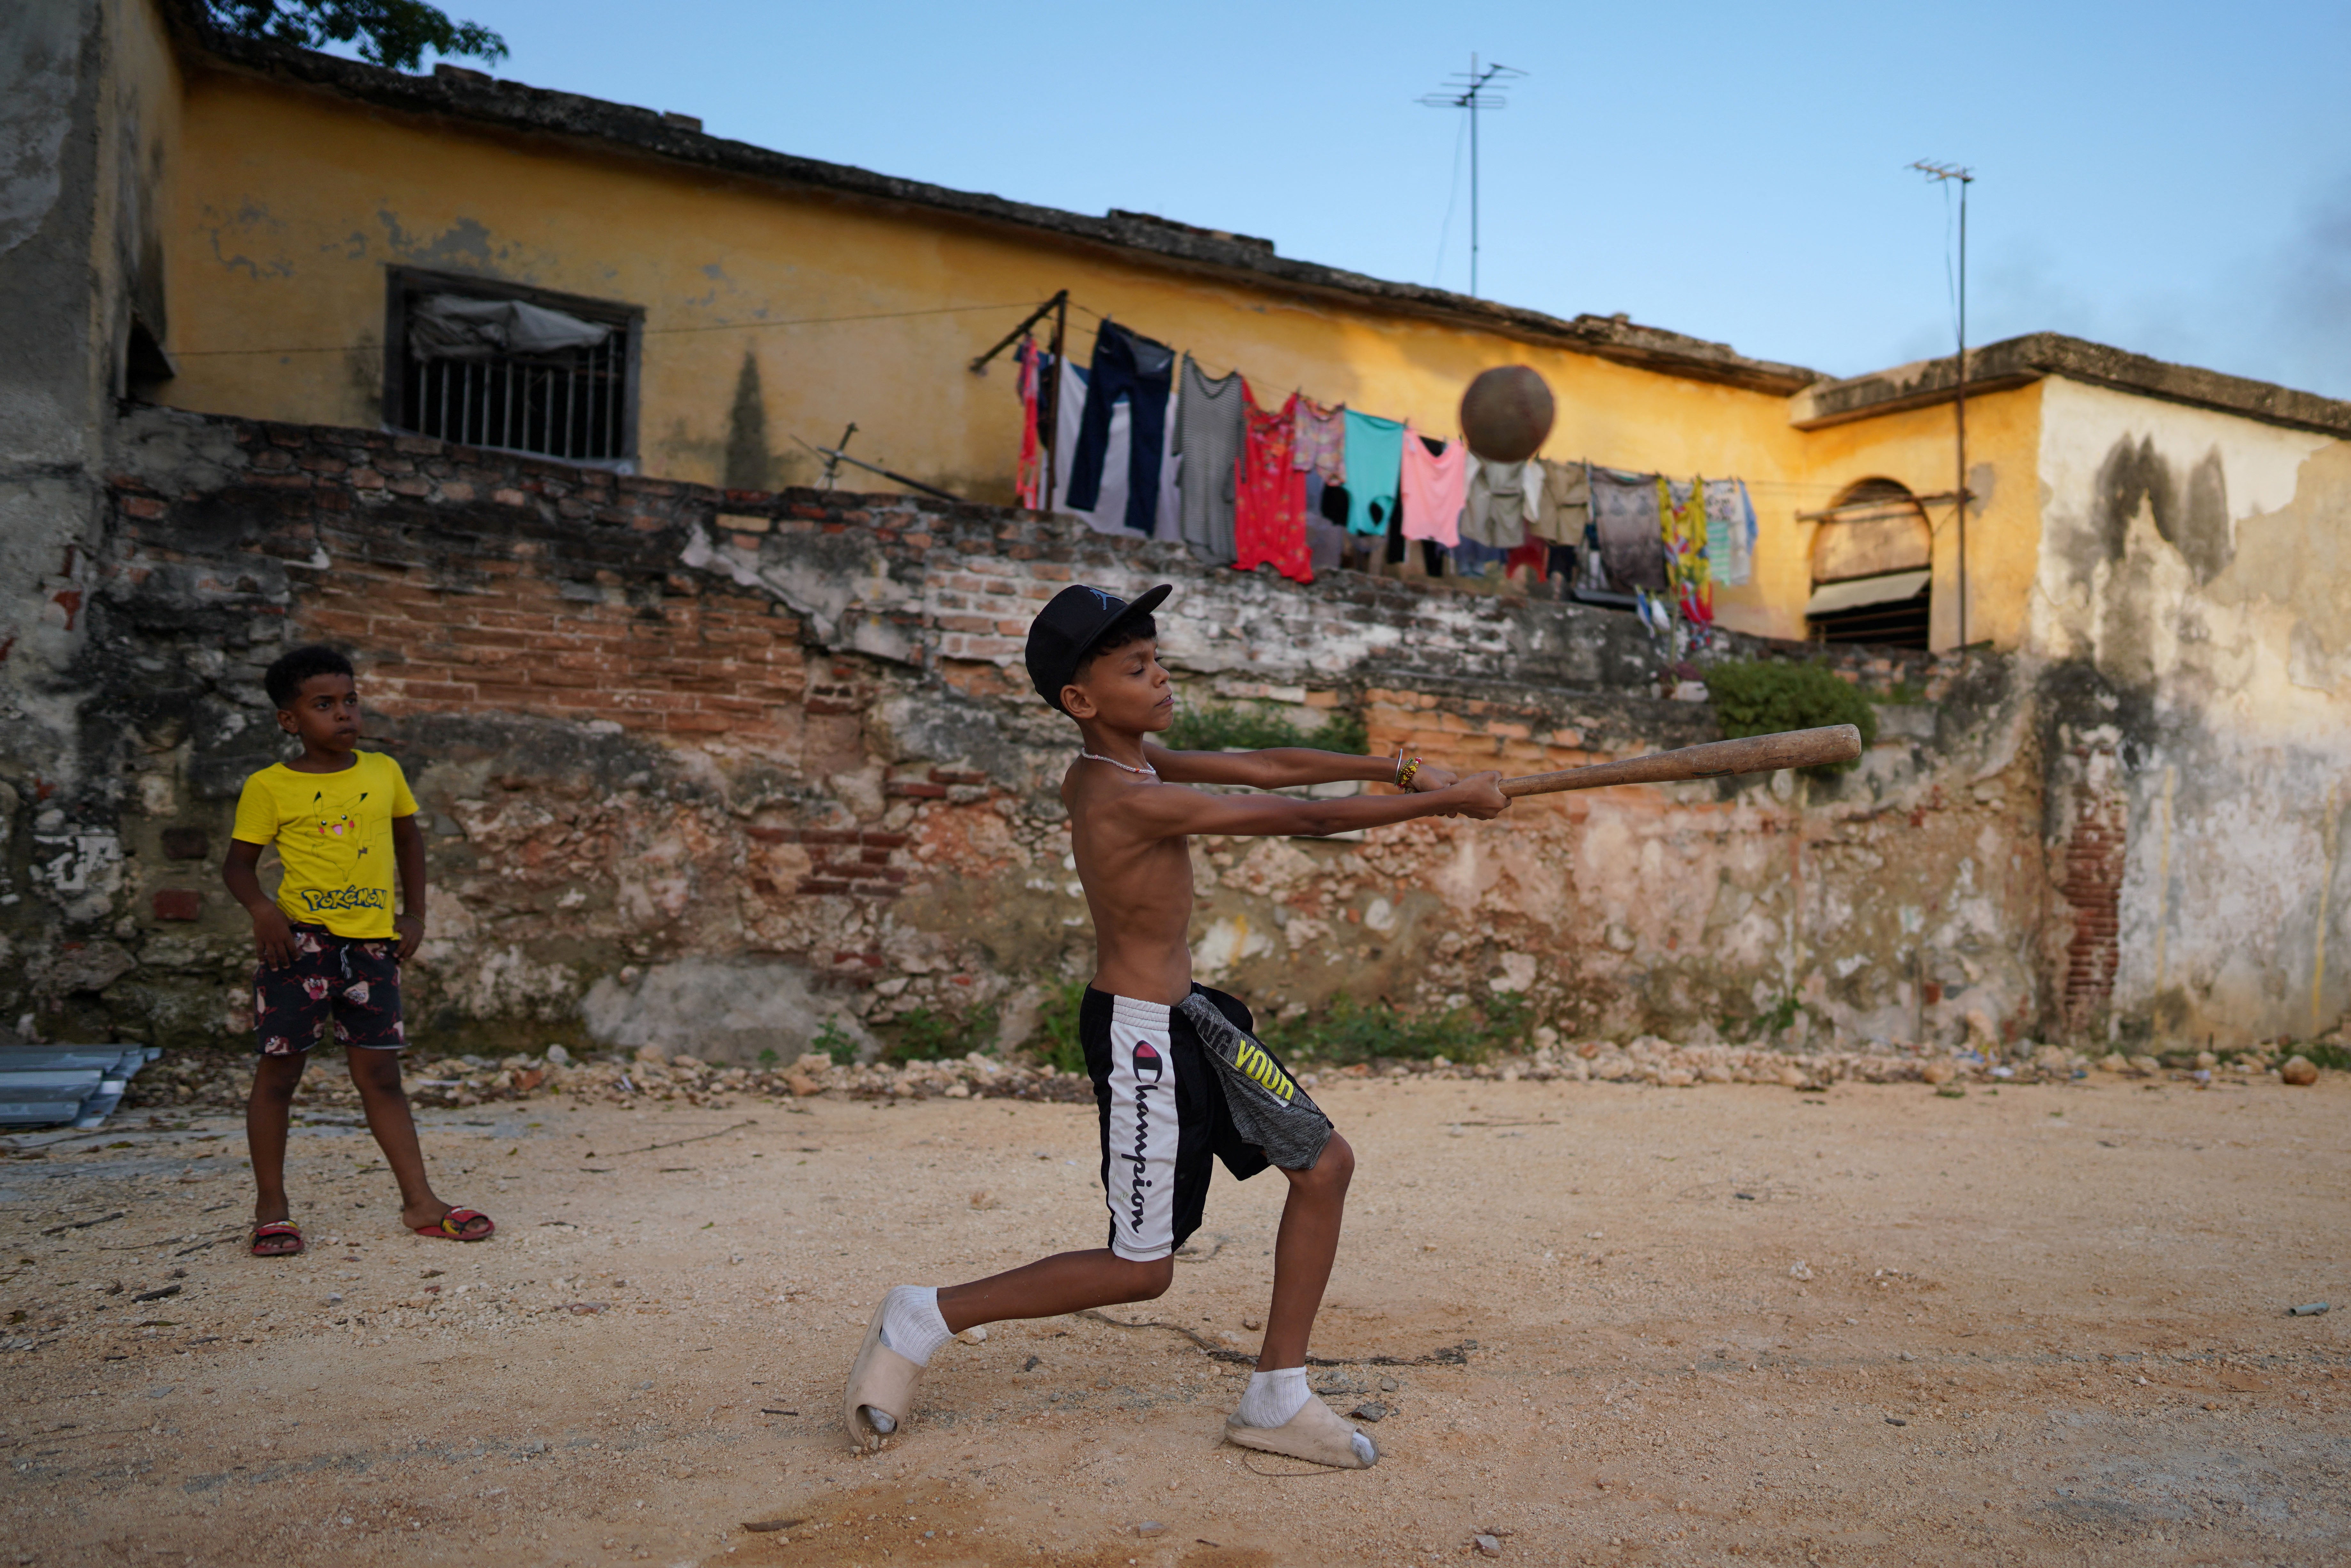 Kevin plays with friends at a vacant lot in Havana